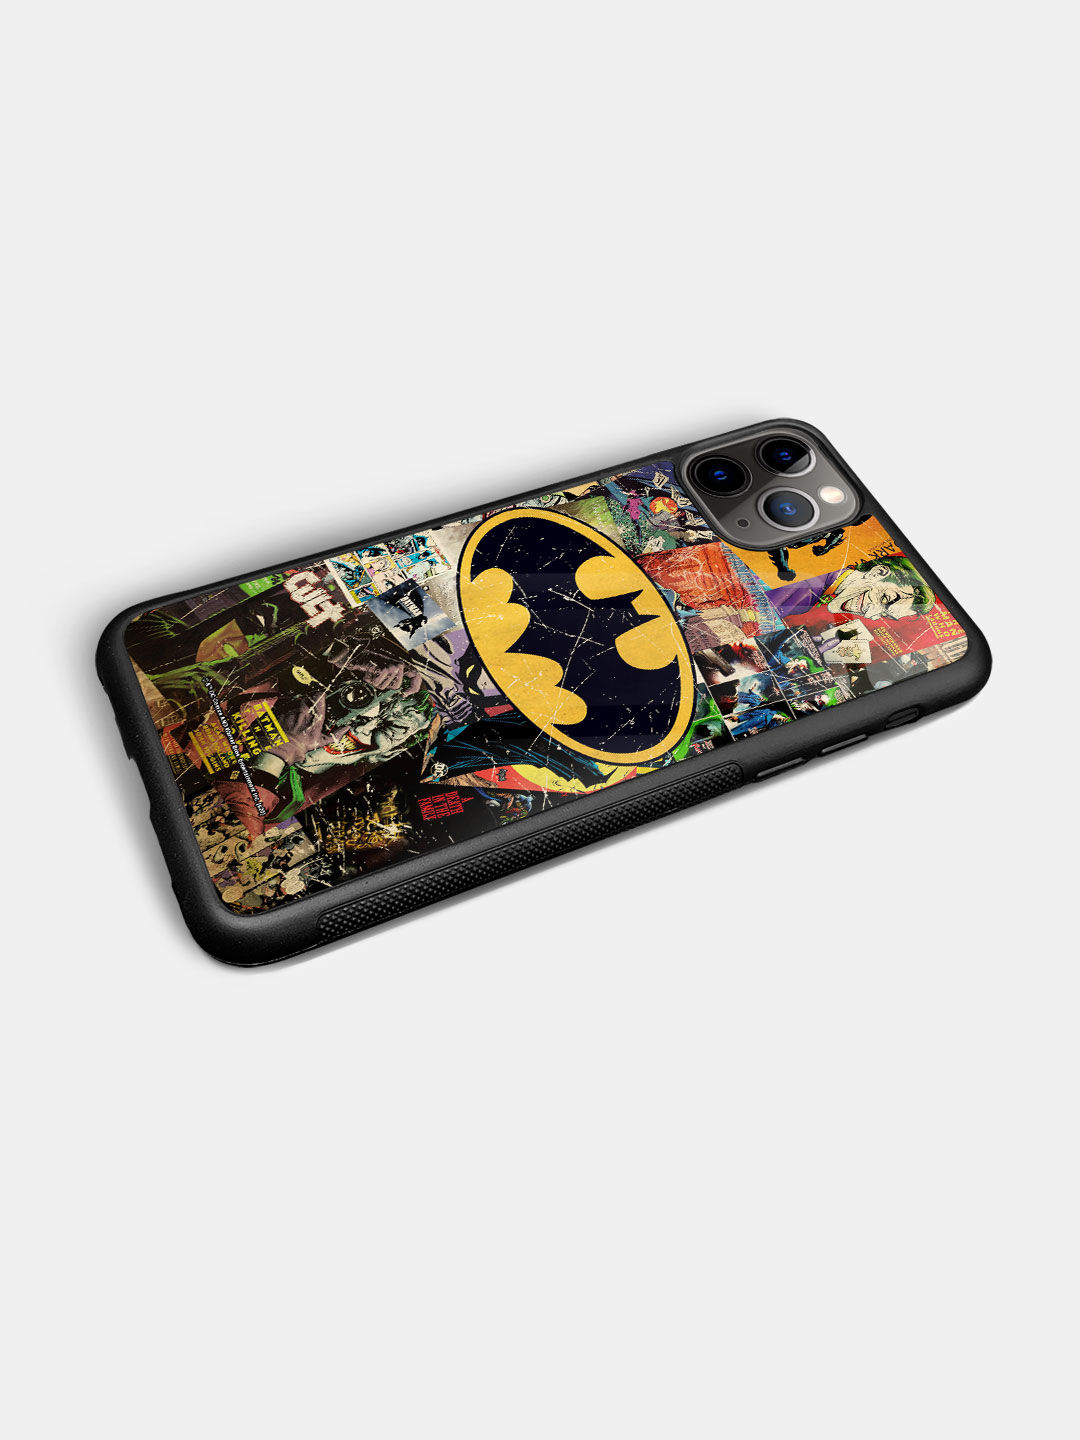 Hentai iPhone 11 Pro Case by Reo Anime  Pixels